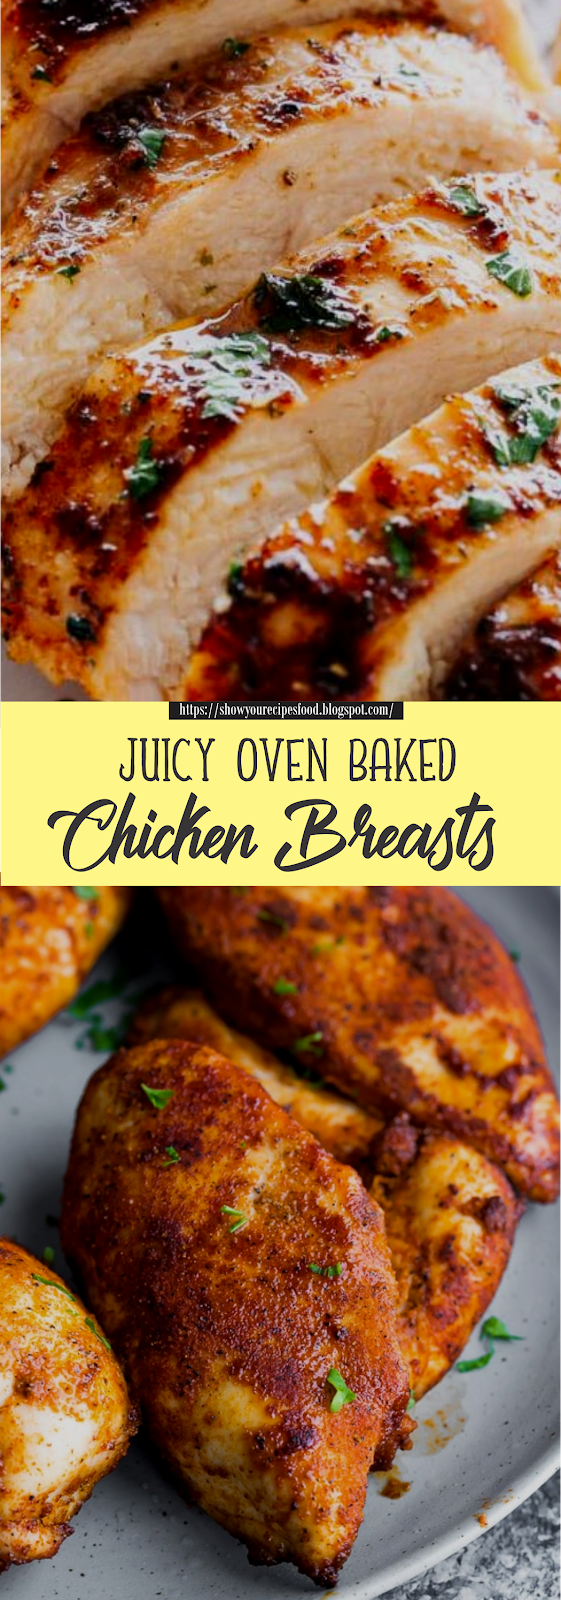 Juicy Oven Baked Chicken Breasts | Show You Recipes